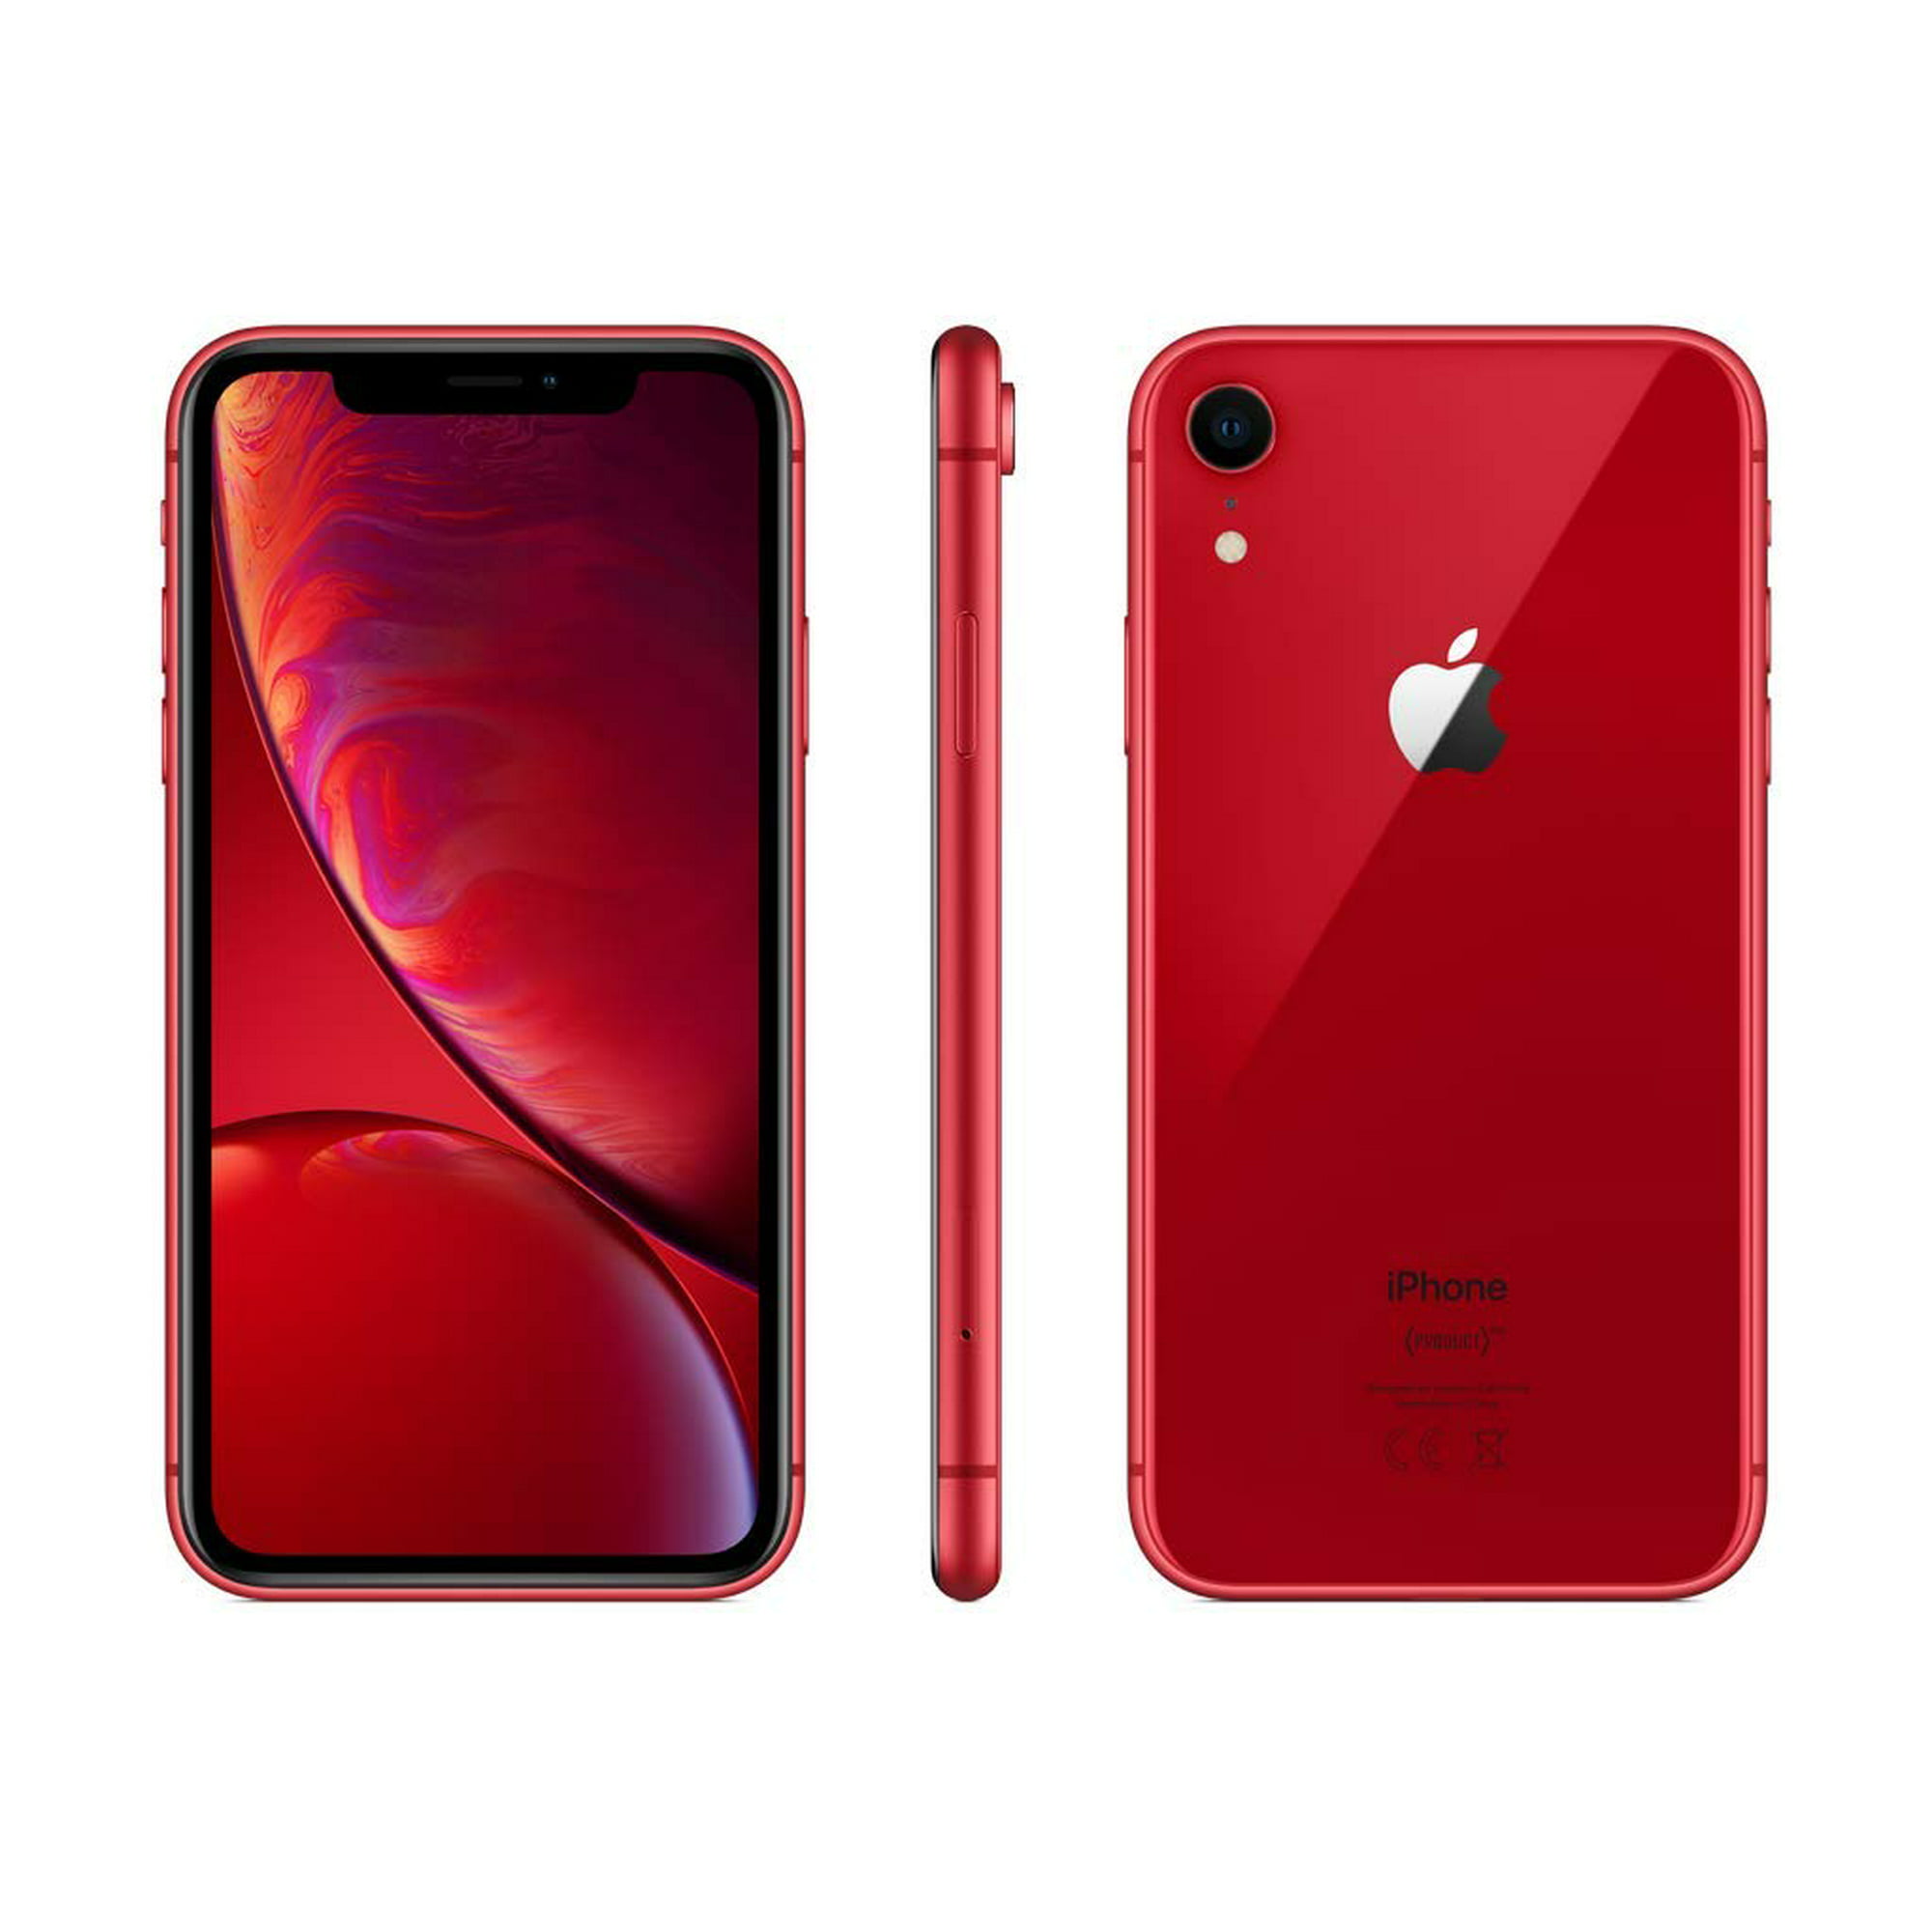 Restored Apple iPhone XR, 64 GB, Red - Fully Unlocked - GSM and CDMA  compatible (Refurbished)